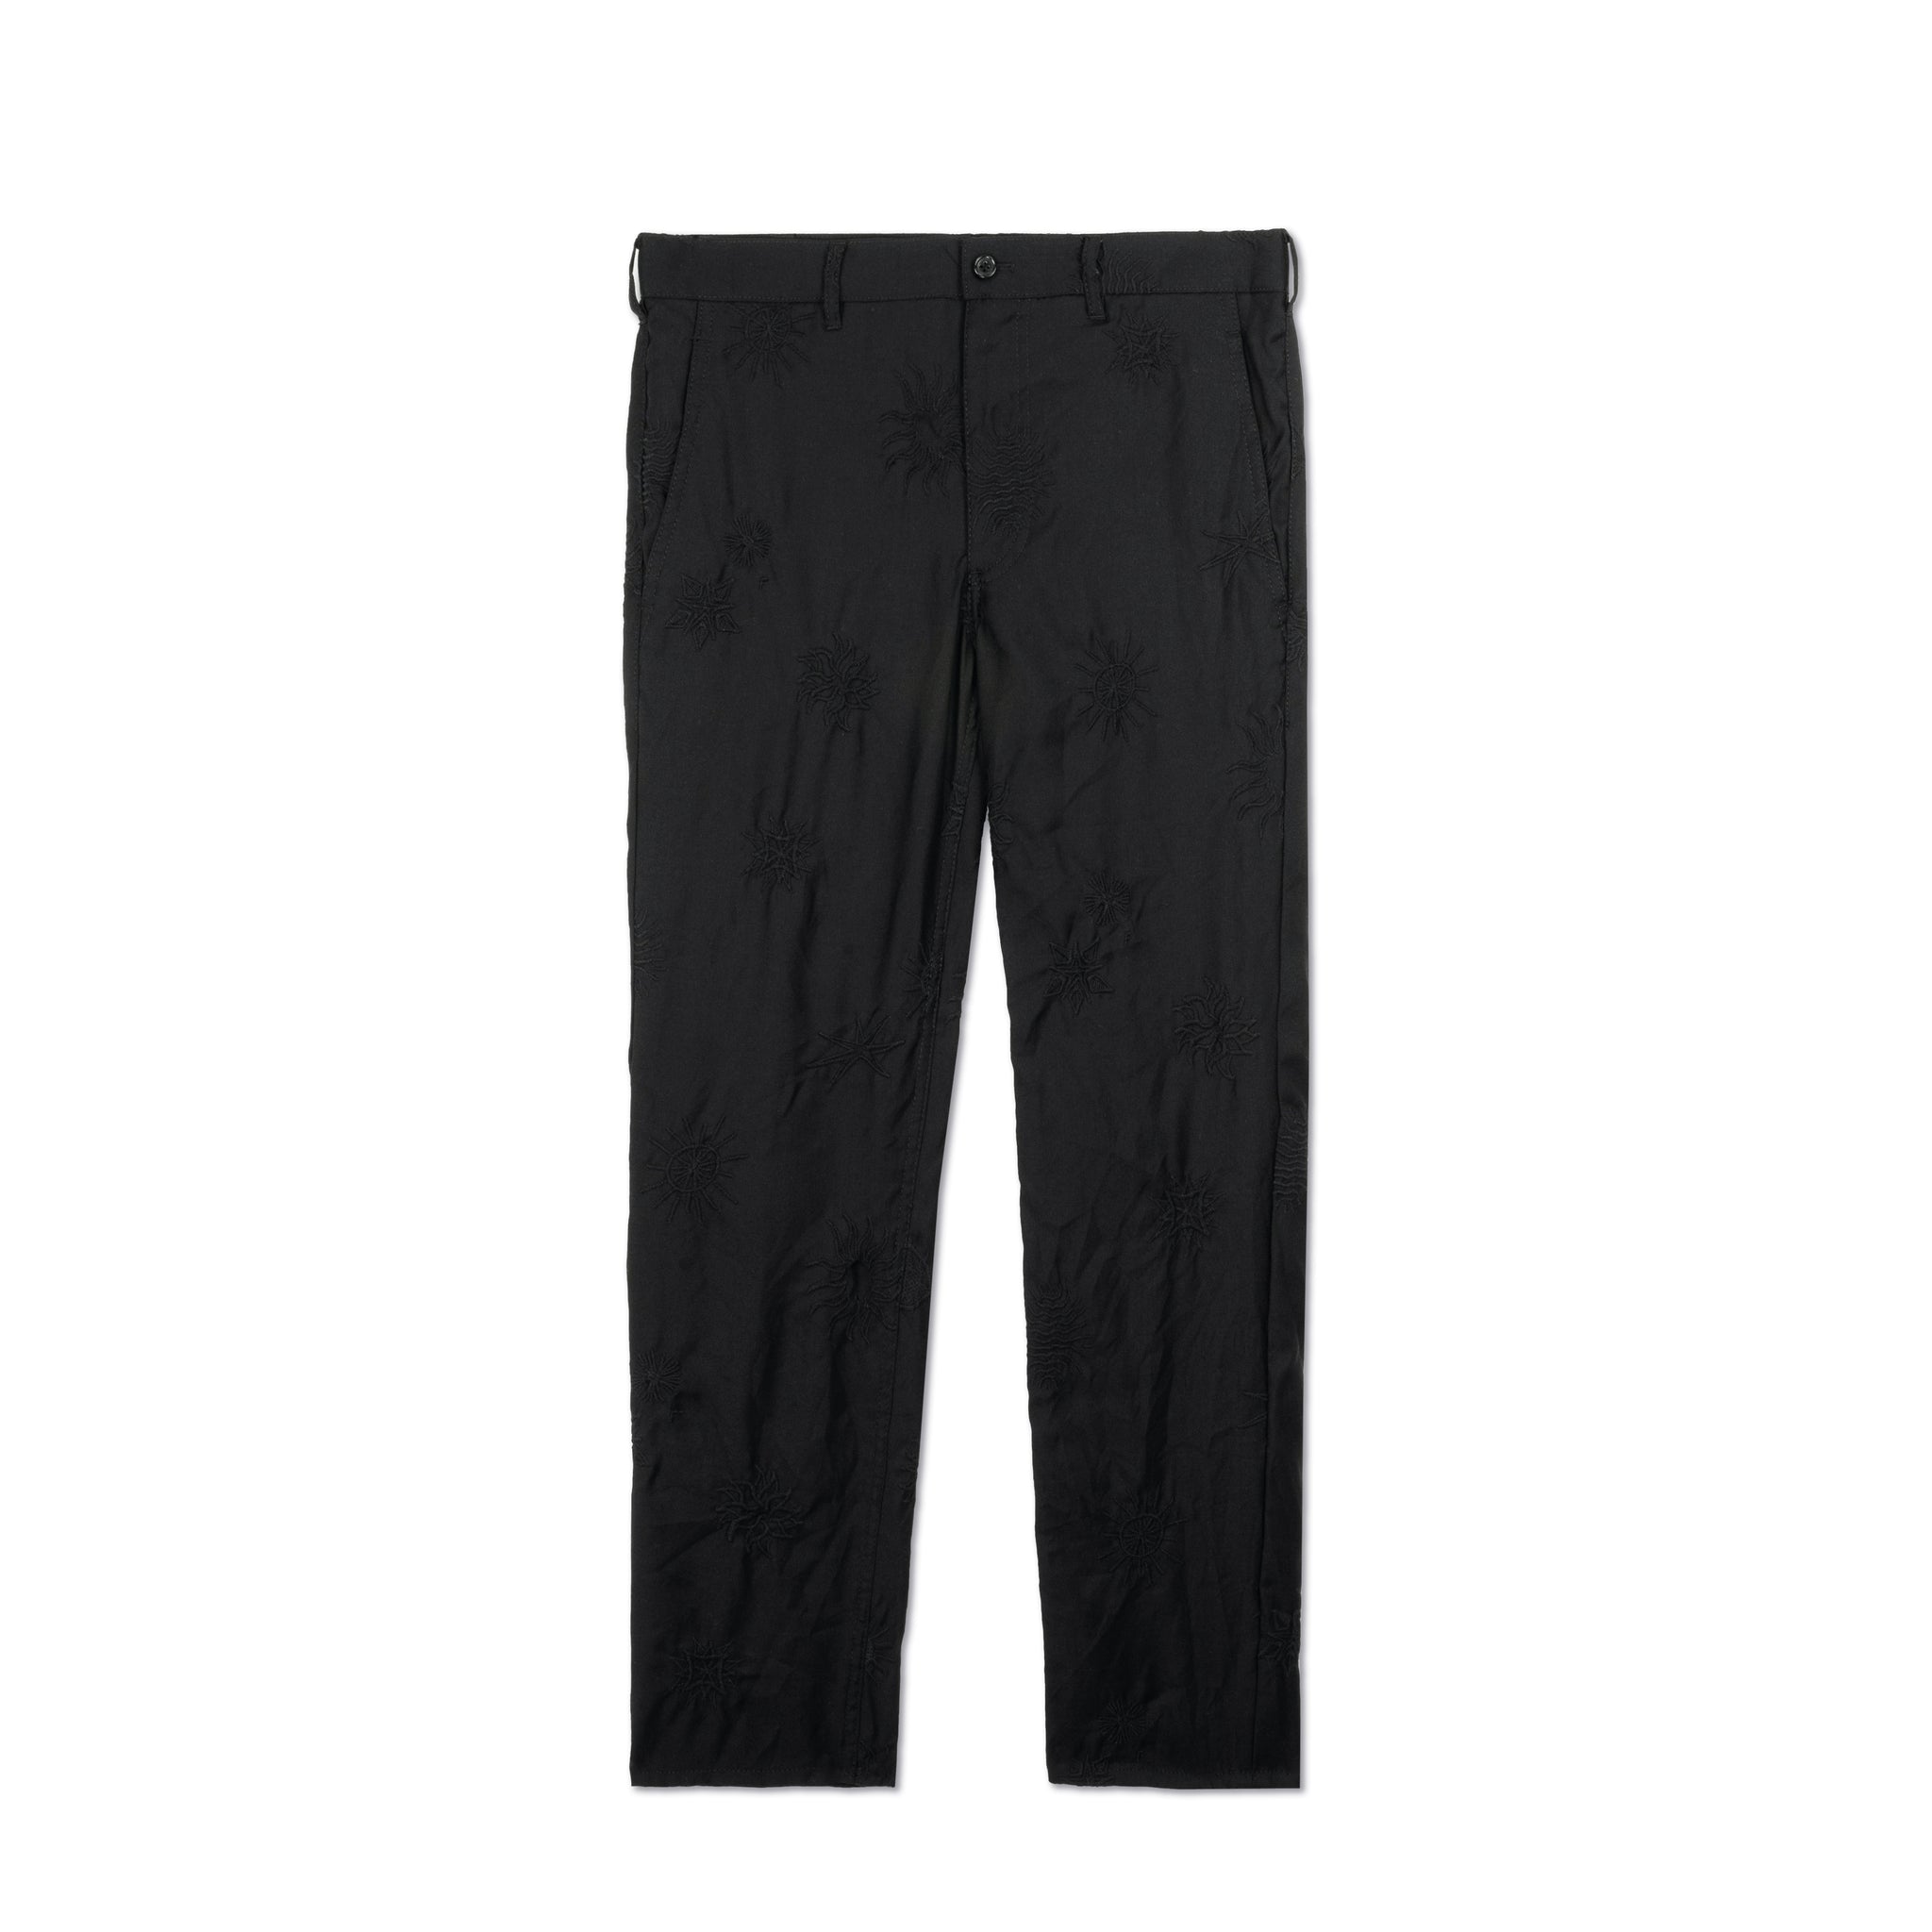 Filip Pagowski Embroidered Pant